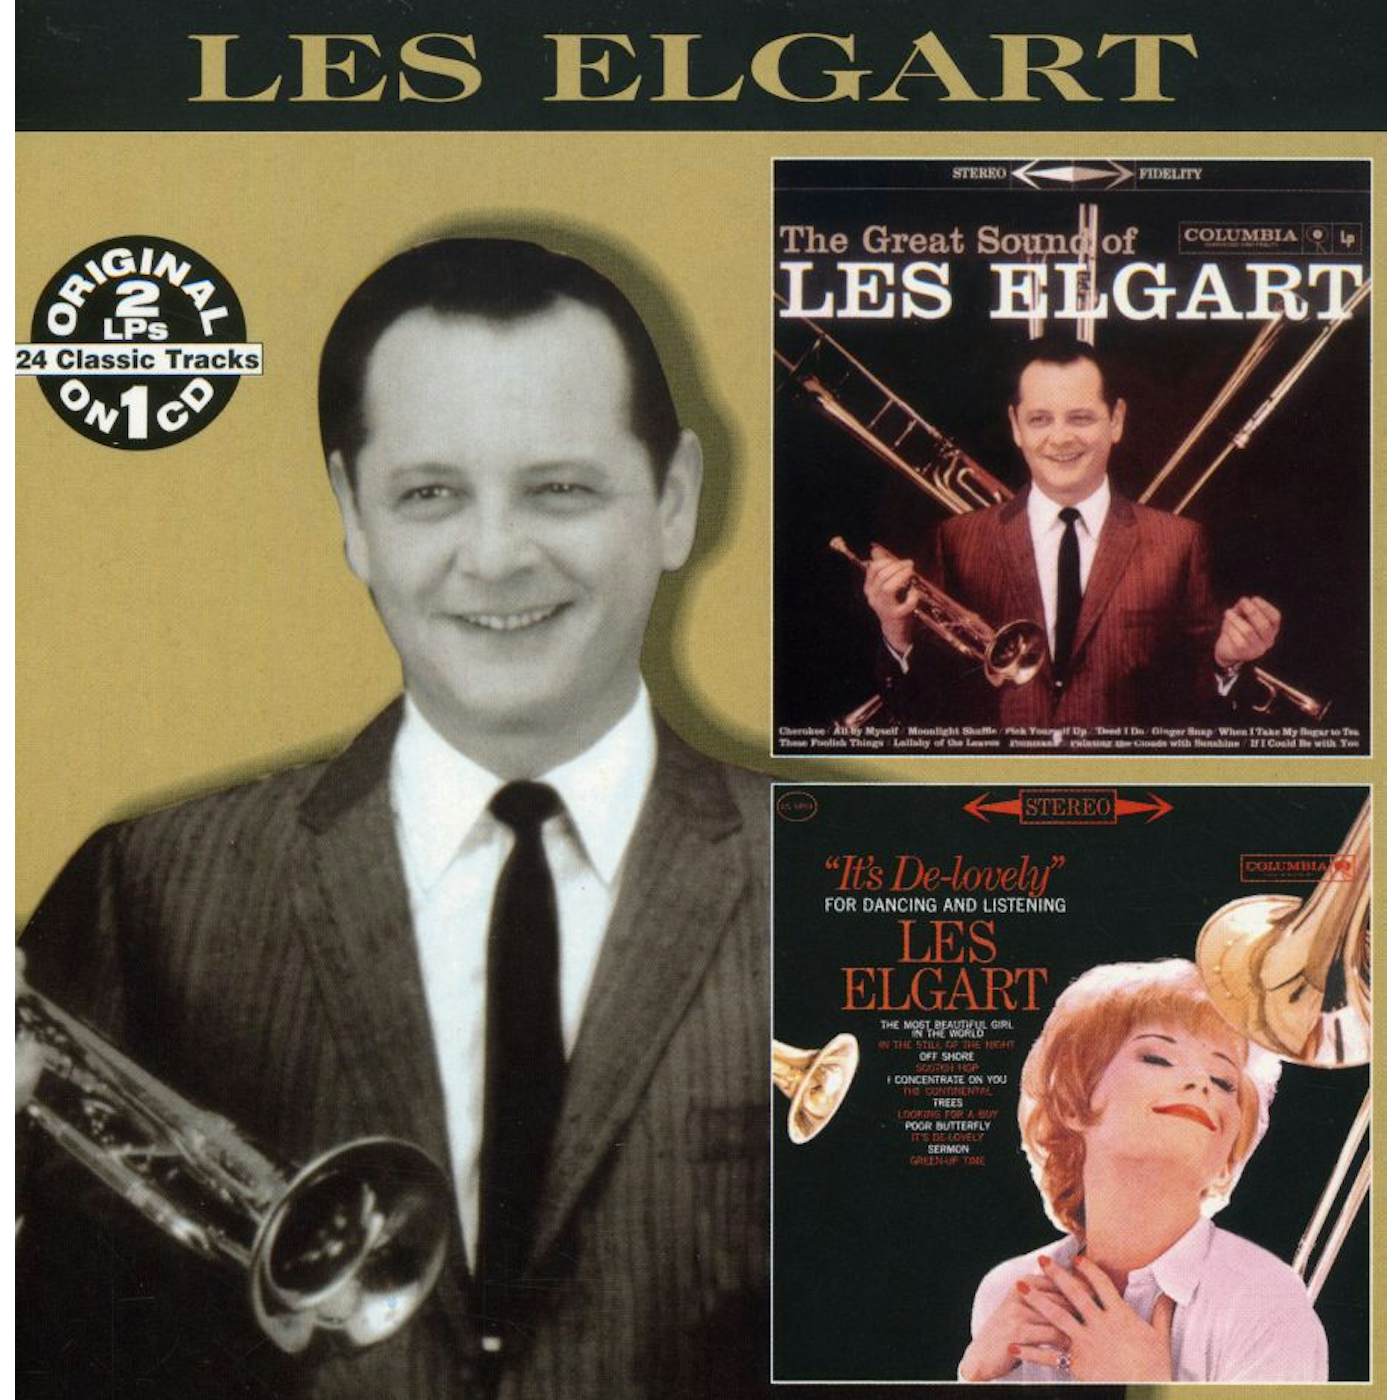 GREAT SOUND OF LES ELGART / IT'S DELOVELY CD